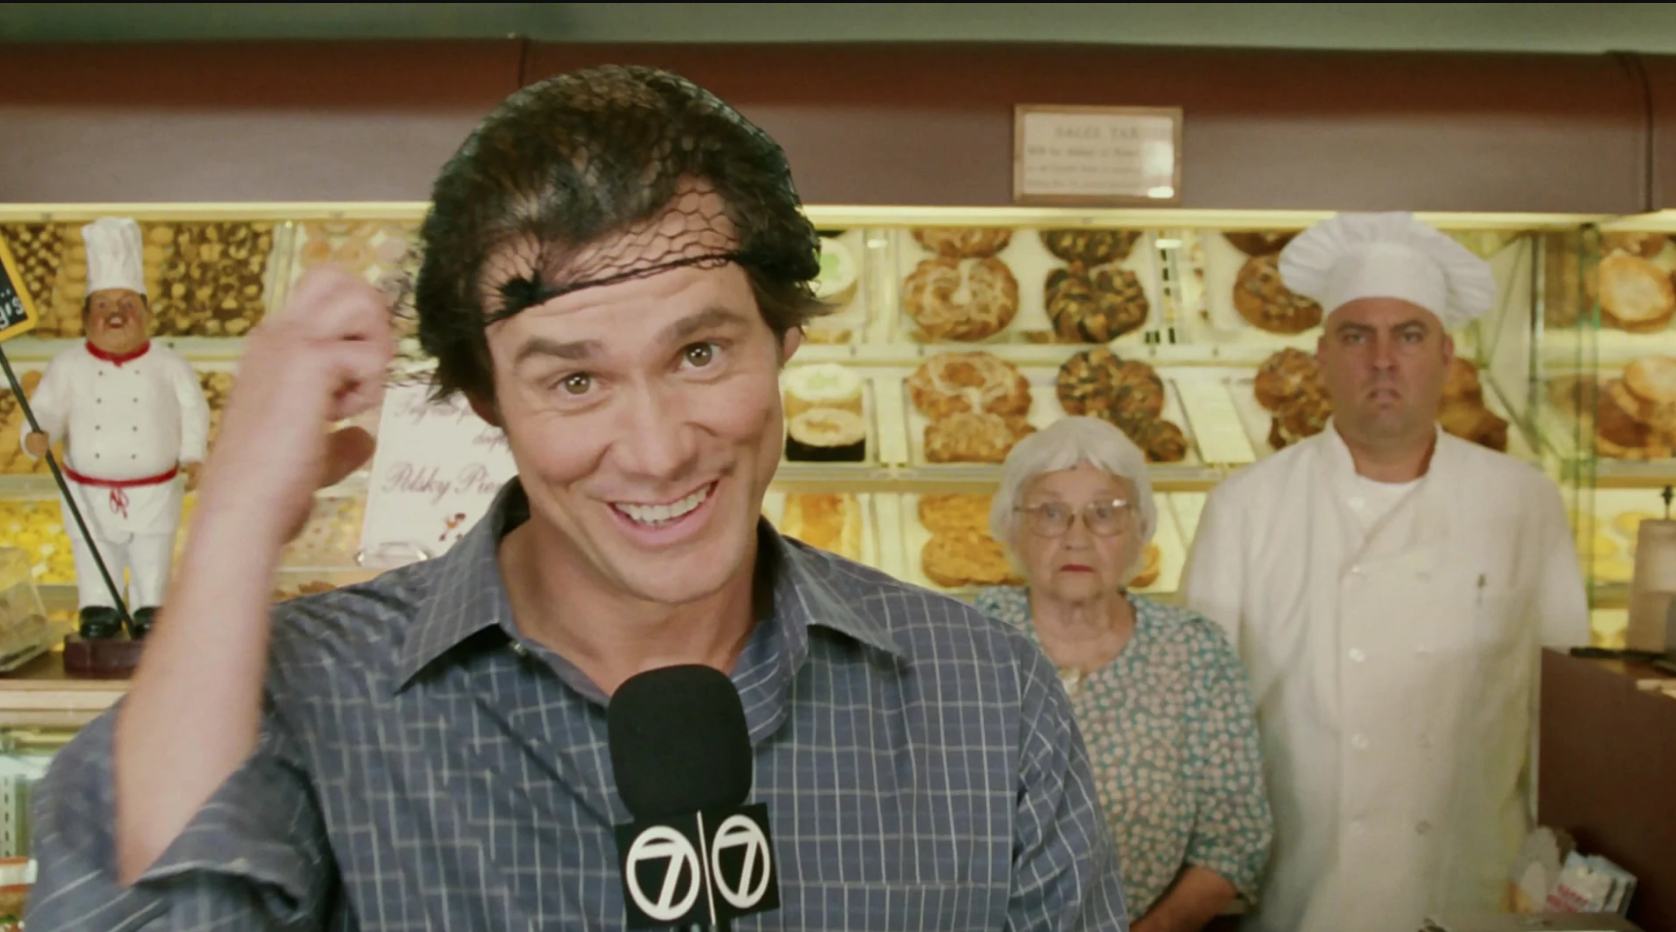 scene from the movie where he reports in a bagel shop